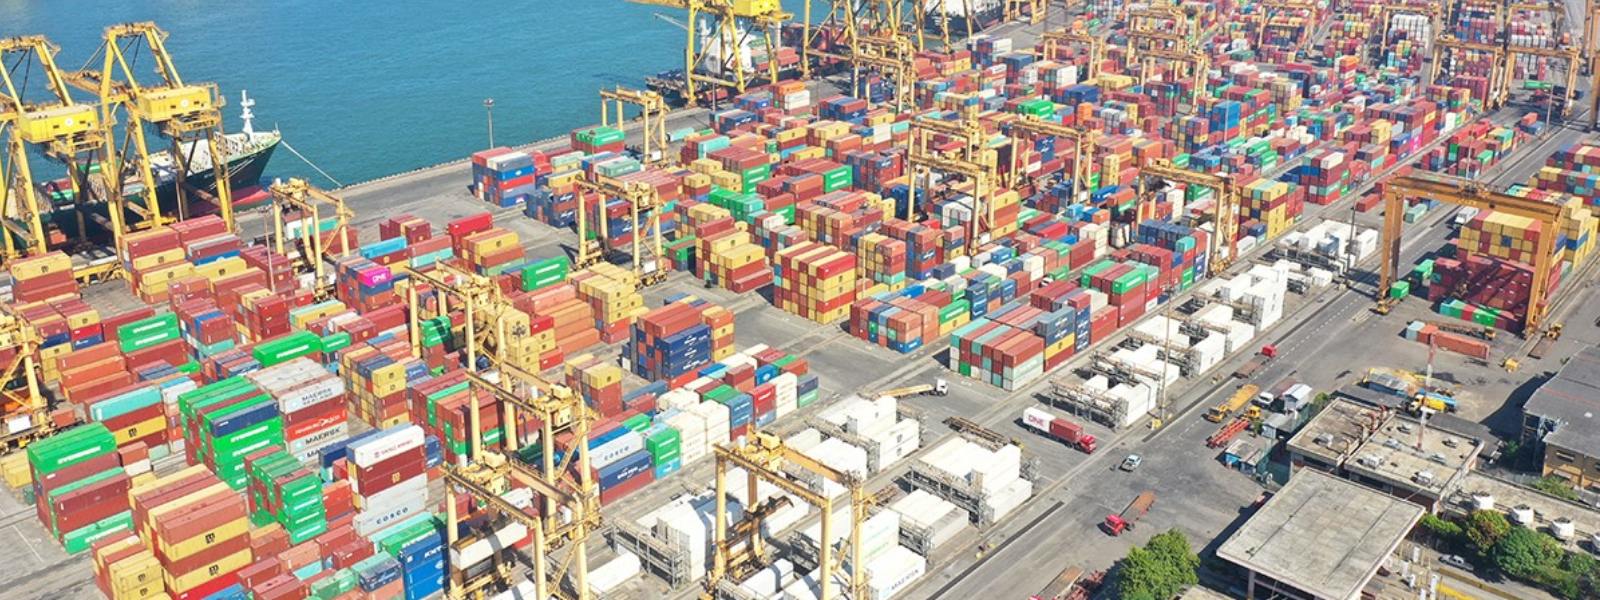 Outrage on joint venture in Colombo Port with India’s Adani Group